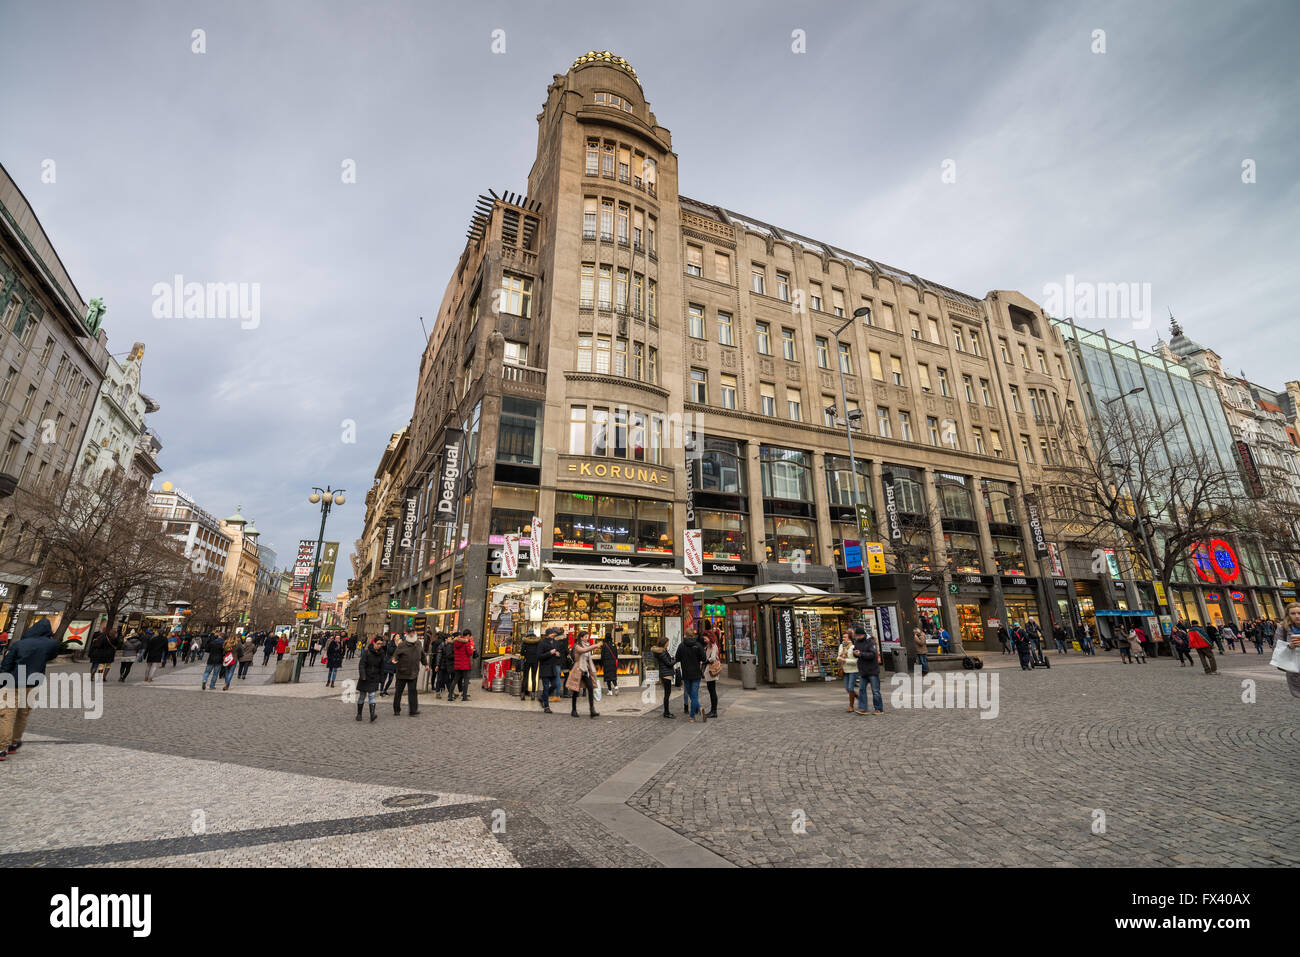 Cafe Europa Prague High Resolution Stock Photography and Images - Alamy